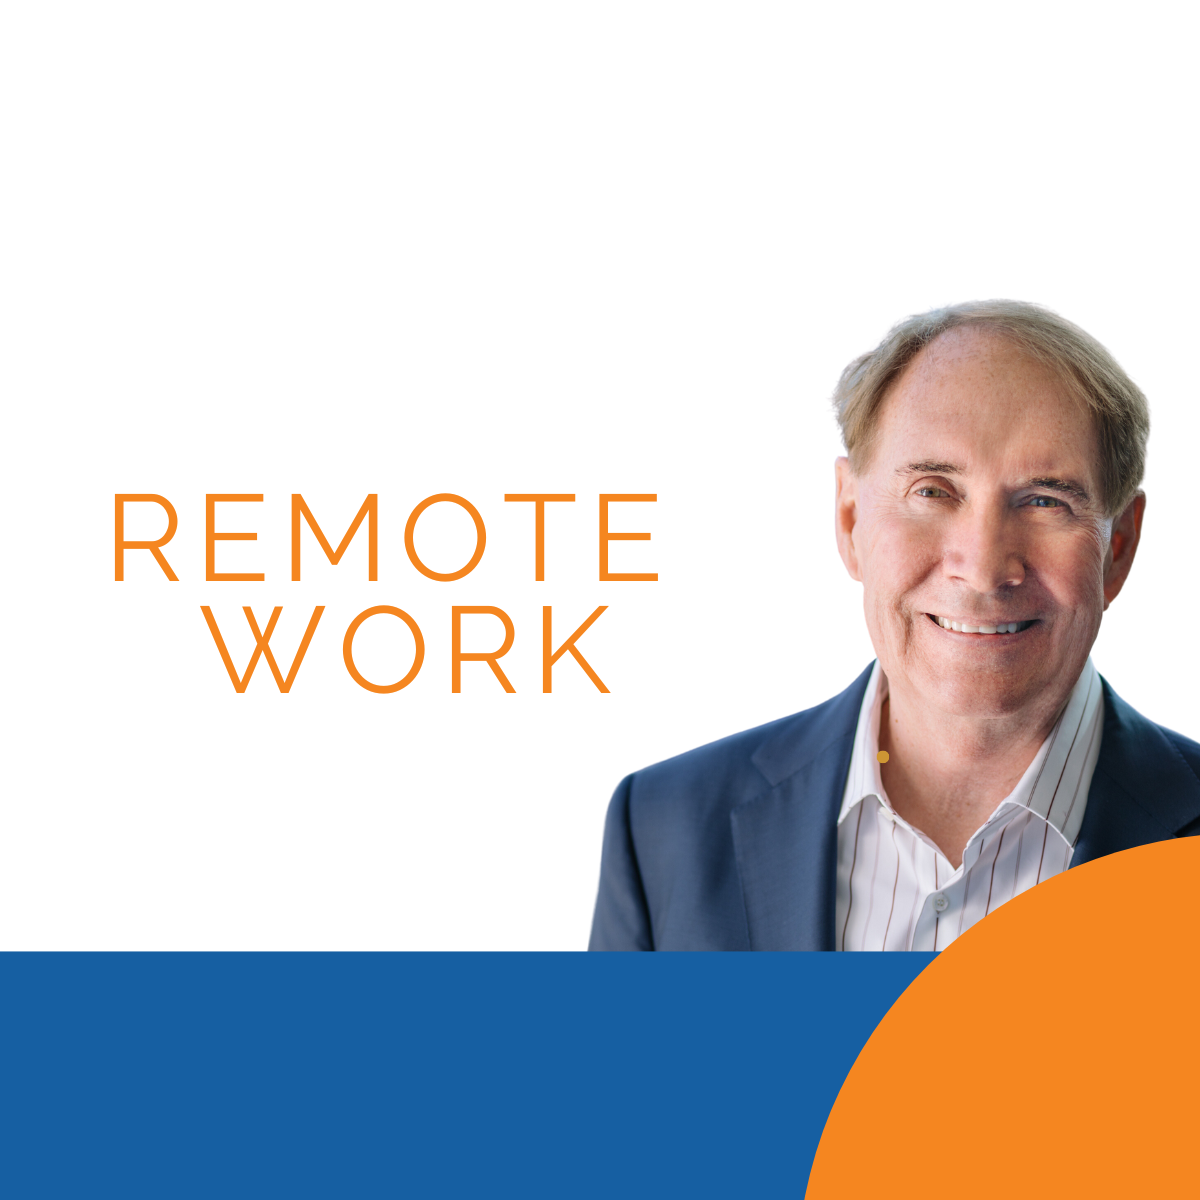 A Boomer's Reflections on the Business Impact of Remote Work